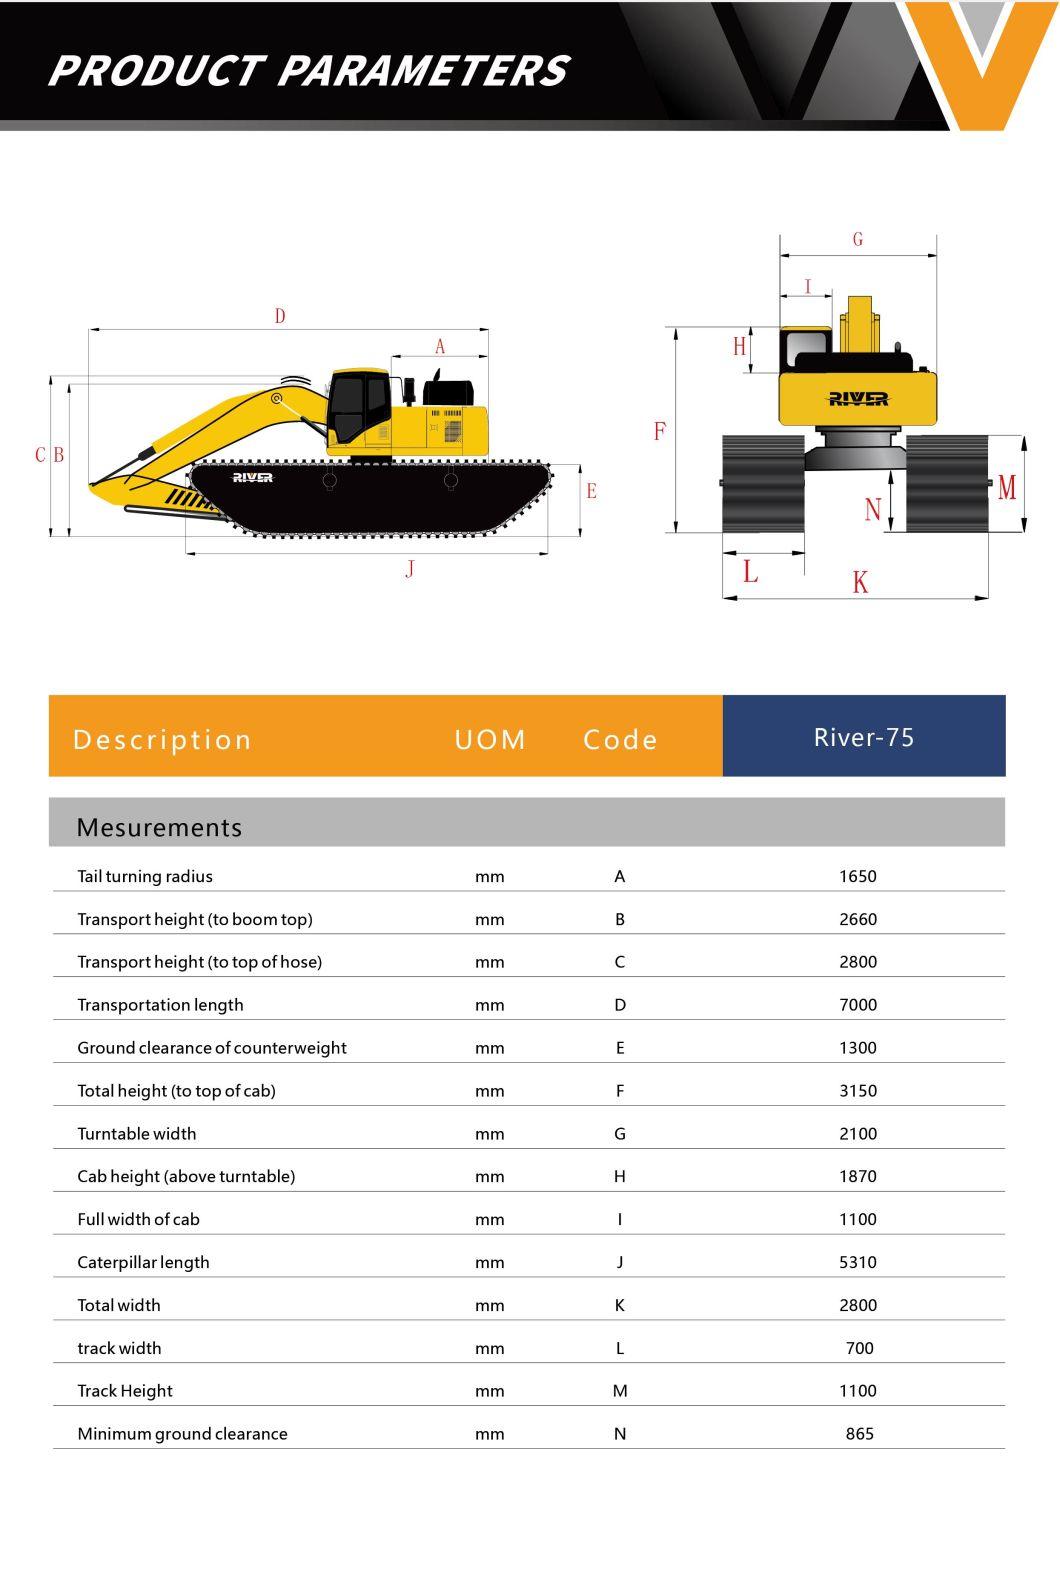 Secondhand Used Cat 320c Dredging Excavator 20 Ton Amphibious Excavator with New Pontoon Undercarriage and Long Reach Arm